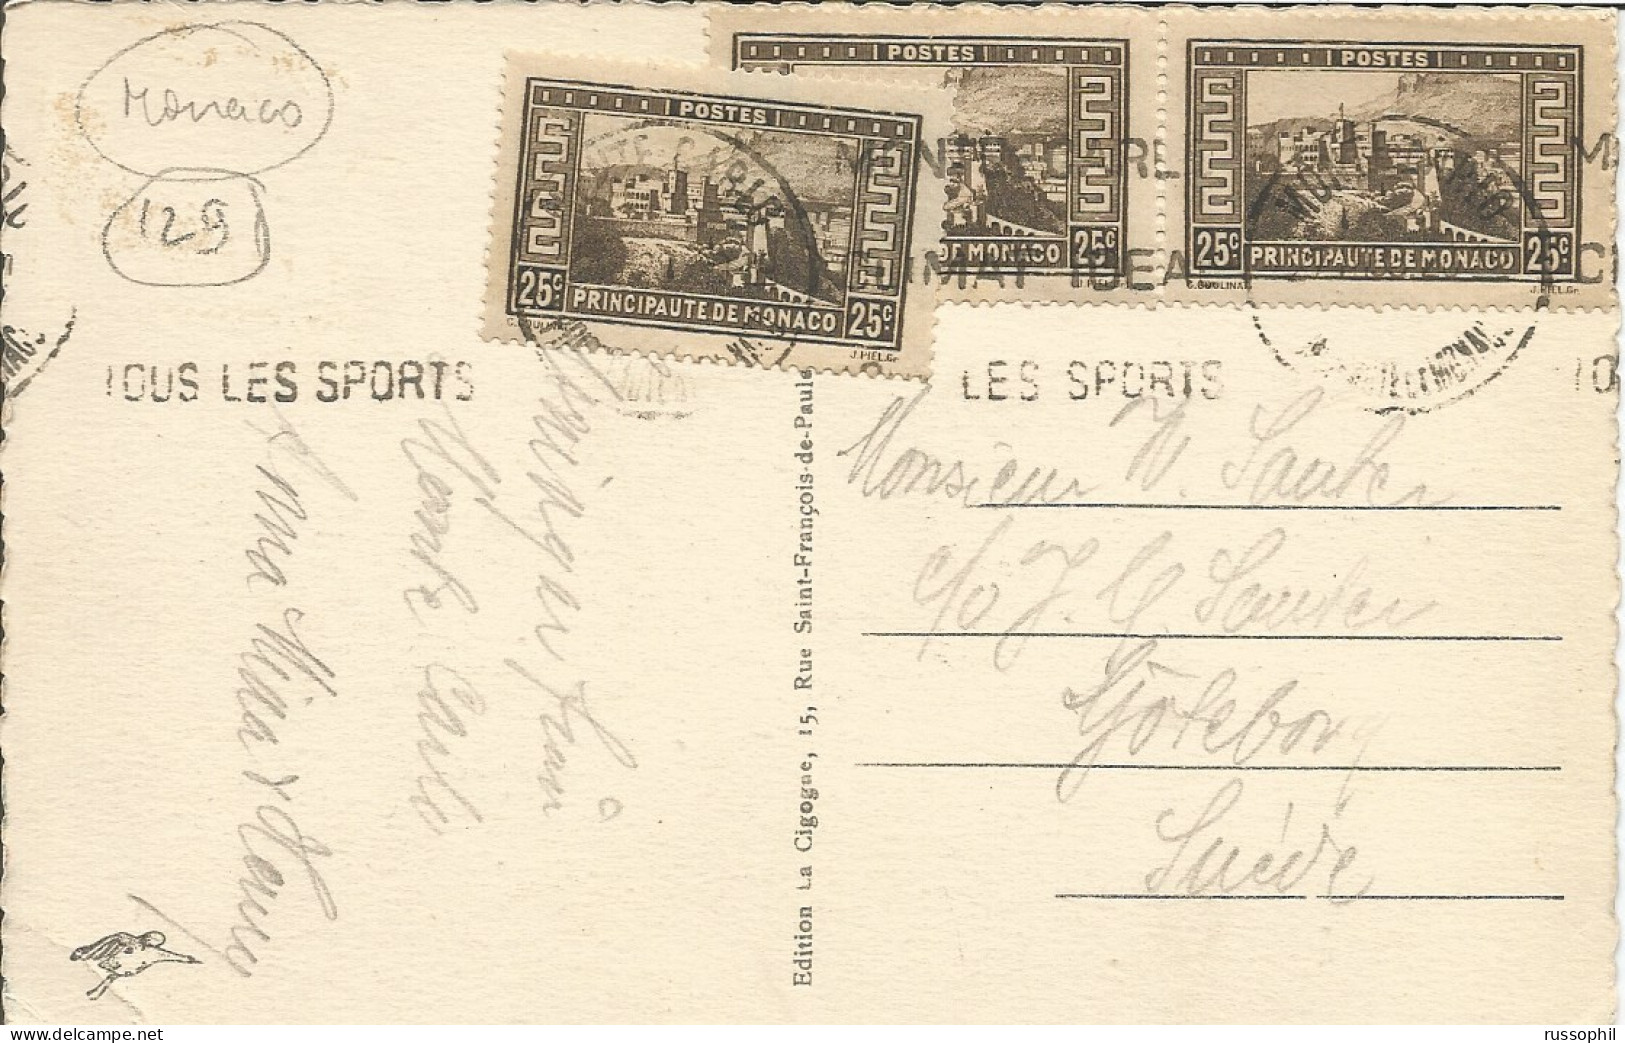 MONACO - 75 CENT FRANKING ( Yv. #121 X 3) ON PC (VIEW OF MONTE CARLO) TO SWEDEN - 1938 - Covers & Documents